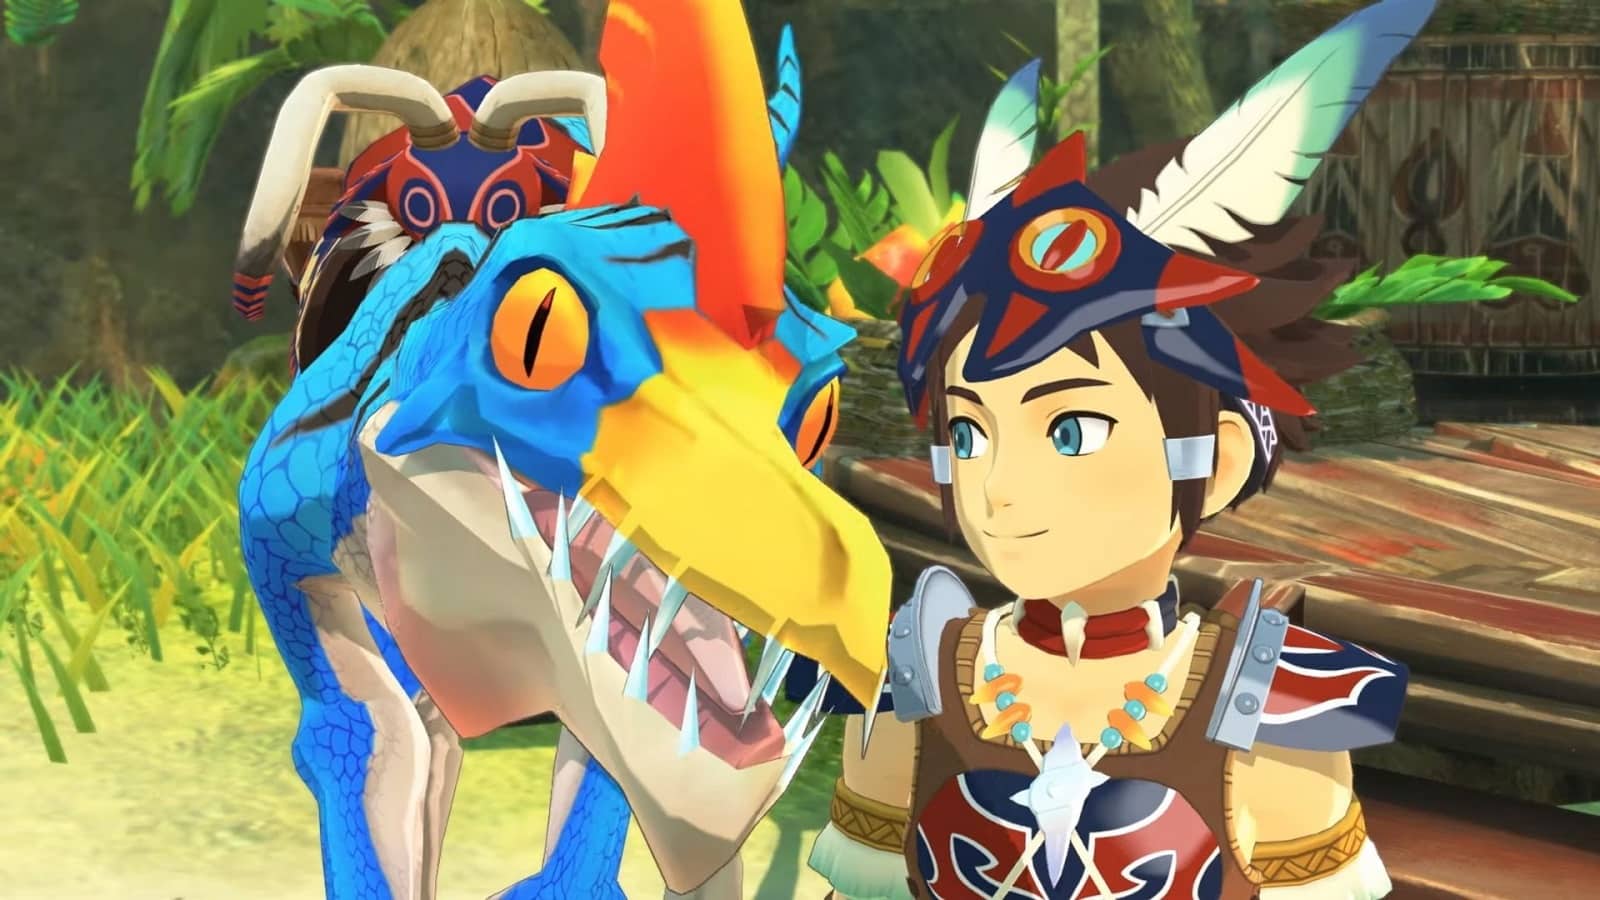 Monster Hunter Stories 2 will have a demo on June 25 and progress will carry to the full game